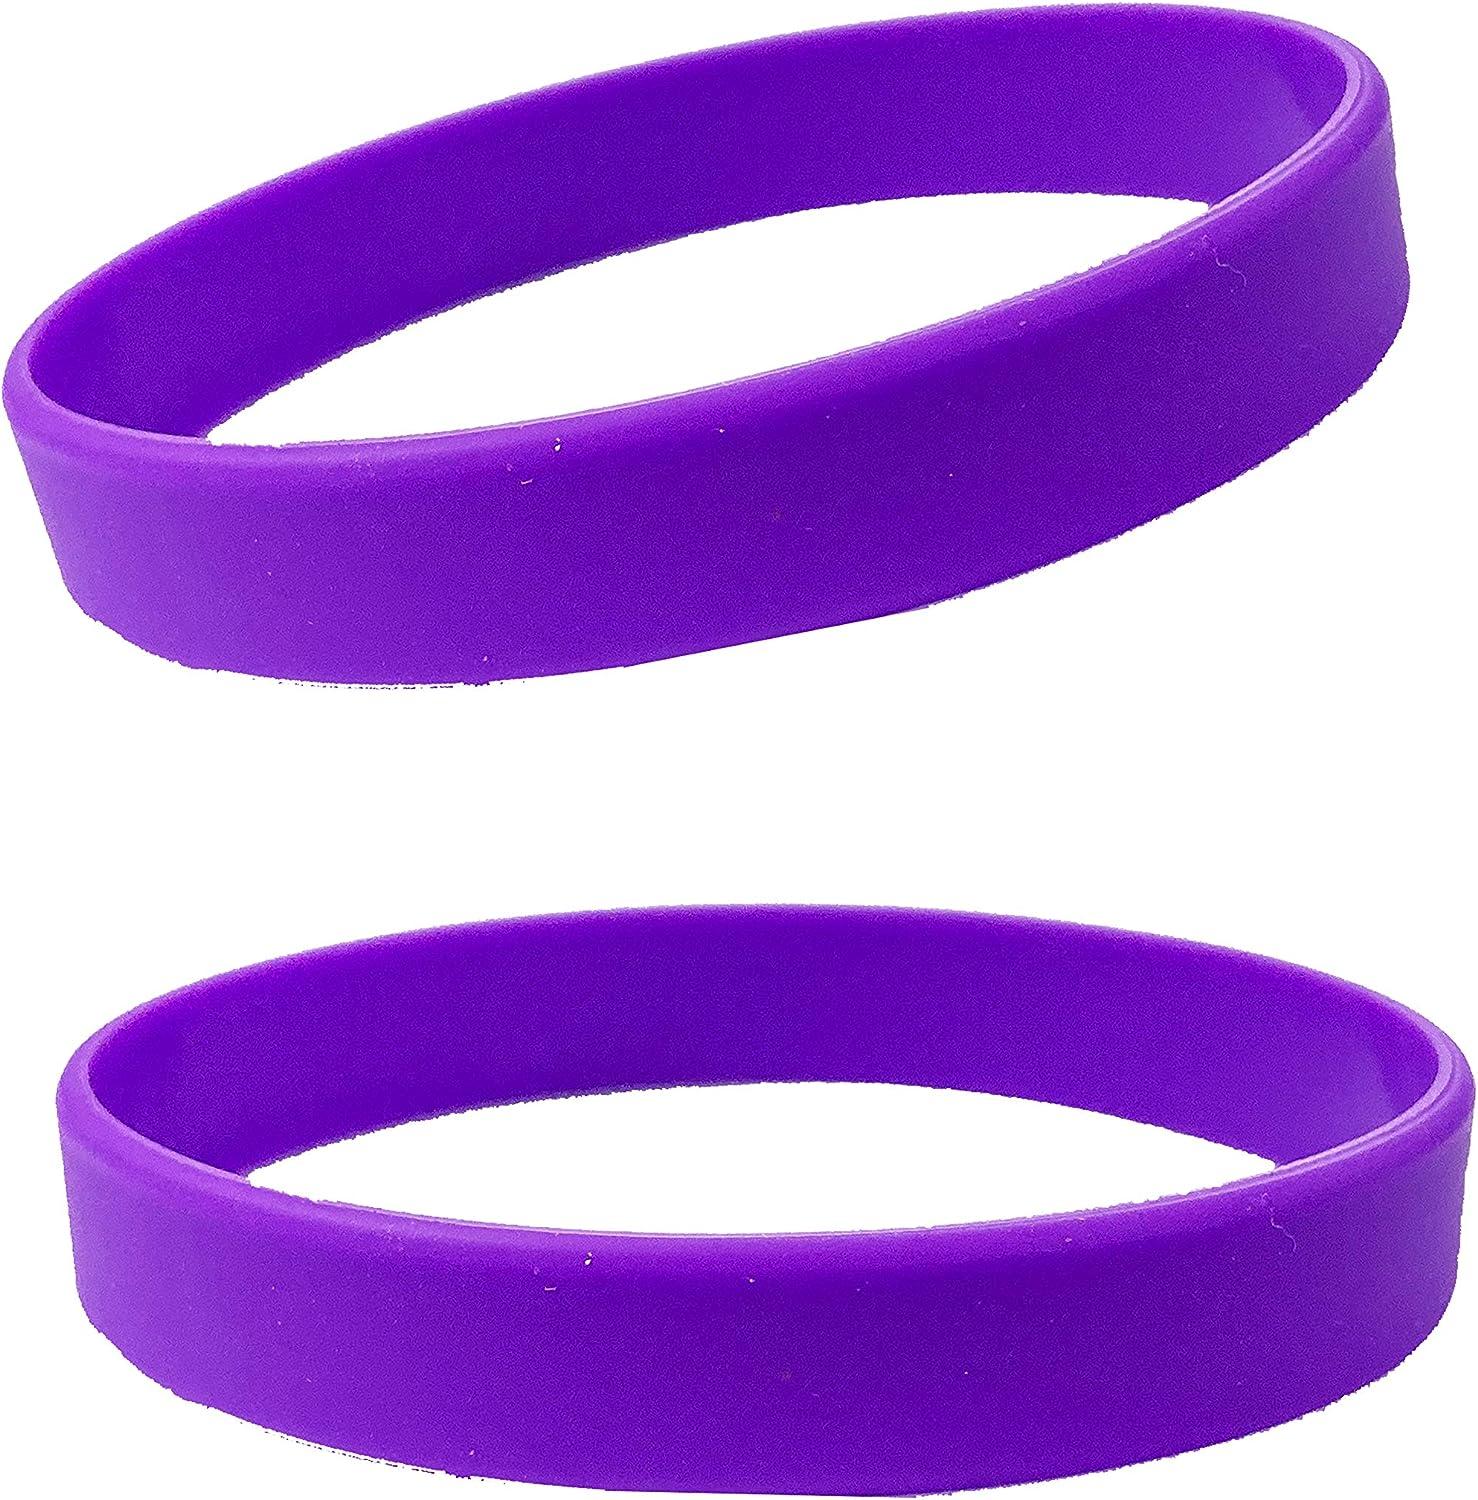 HSQ 6 Pcs Solid Blue Silicone Bracelets Wristbands for Sports Club, Group  Games,Kids Play,Party Favors Adults Fashion Party Sports Accessories,Sky